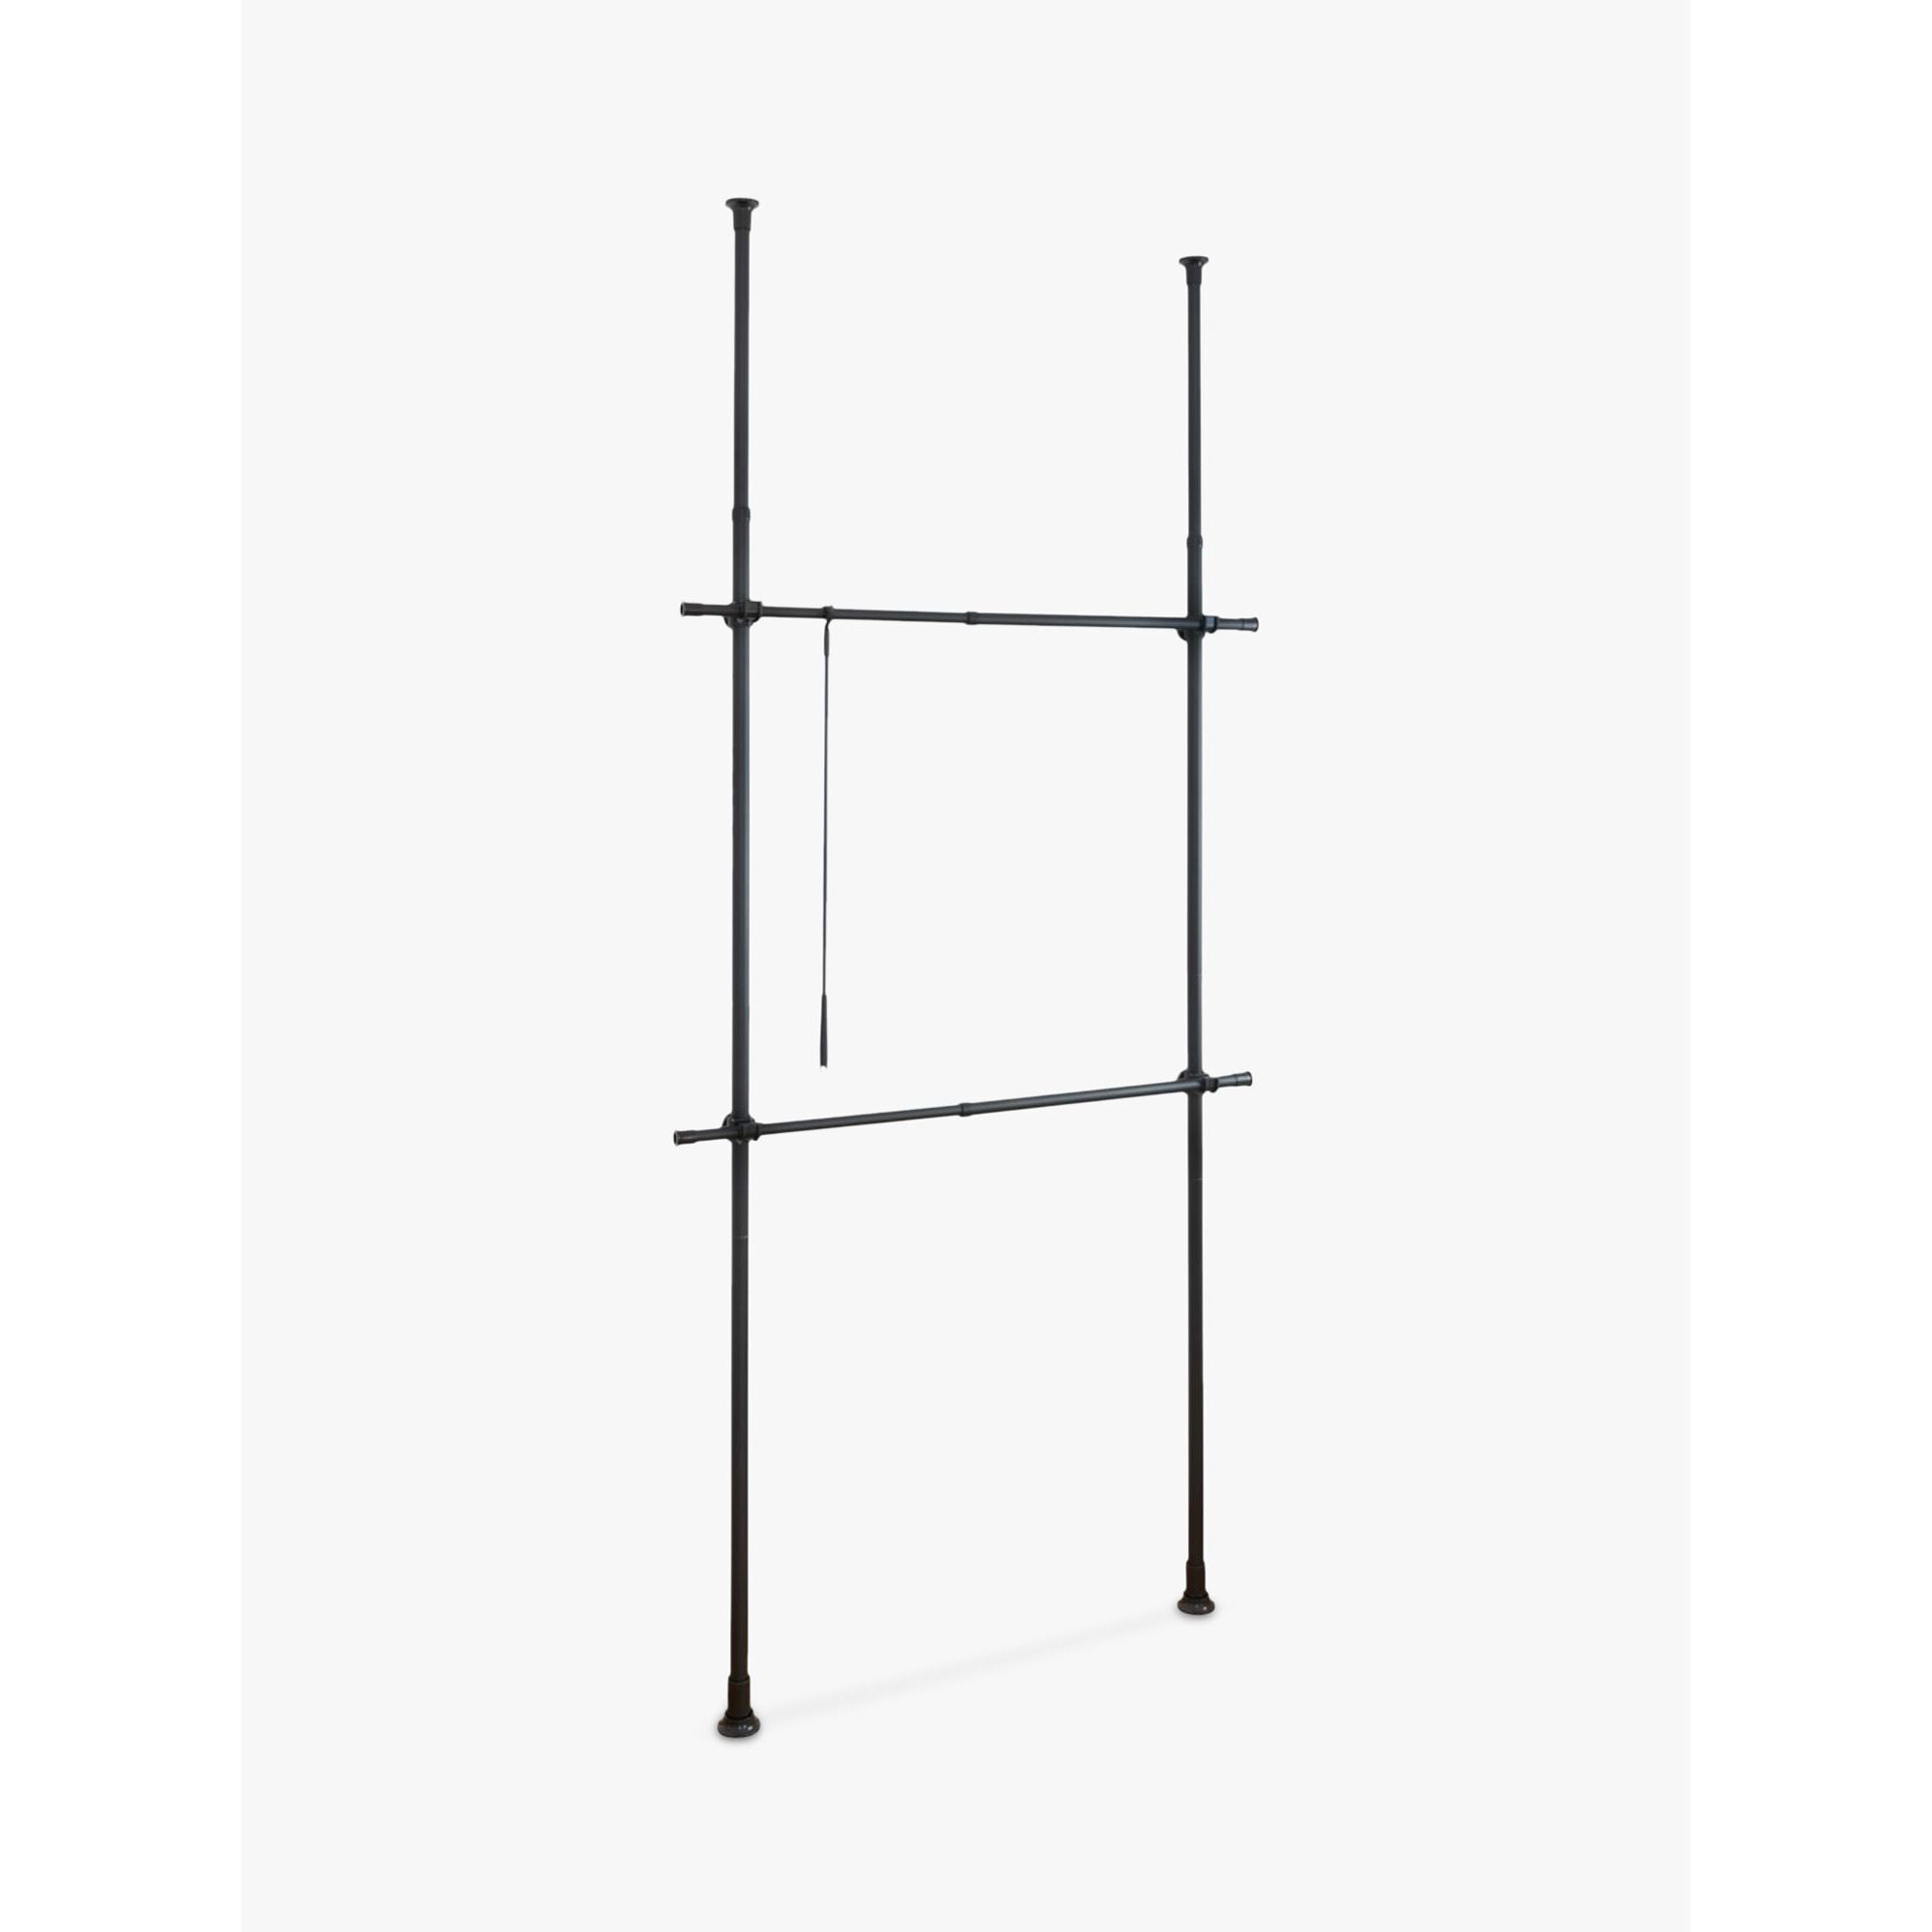 Wenko Single Hercules Clothes Stand, Black - image 1